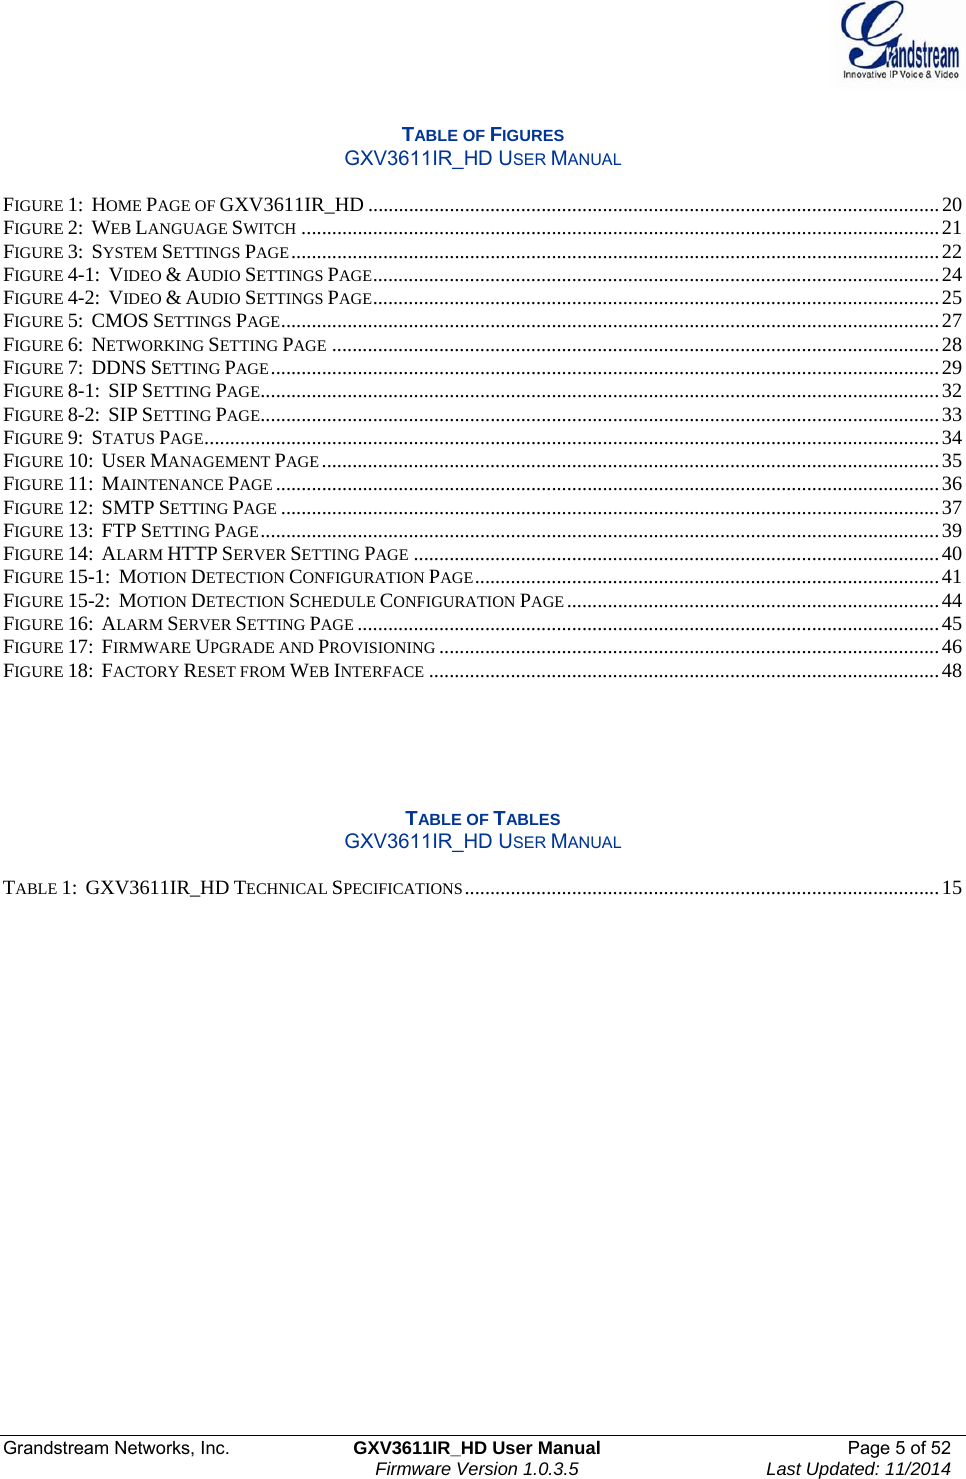  Grandstream Networks, Inc.  GXV3611IR_HD User Manual  Page 5 of 52    Firmware Version 1.0.3.5  Last Updated: 11/2014  TABLE OF FIGURES GXV3611IR_HD USER MANUAL  FIGURE 1:  HOME PAGE OF GXV3611IR_HD ................................................................................................................ 20FIGURE 2:  WEB LANGUAGE SWITCH ............................................................................................................................. 21FIGURE 3:  SYSTEM SETTINGS PAGE ............................................................................................................................... 22FIGURE 4-1:  VIDEO &amp; AUDIO SETTINGS PAGE ............................................................................................................... 24FIGURE 4-2:  VIDEO &amp; AUDIO SETTINGS PAGE ............................................................................................................... 25FIGURE 5:  CMOS SETTINGS PAGE ................................................................................................................................. 27FIGURE 6:  NETWORKING SETTING PAGE ....................................................................................................................... 28FIGURE 7:  DDNS SETTING PAGE ................................................................................................................................... 29FIGURE 8-1:  SIP SETTING PAGE ..................................................................................................................................... 32FIGURE 8-2:  SIP SETTING PAGE ..................................................................................................................................... 33FIGURE 9:  STATUS PAGE ................................................................................................................................................ 34FIGURE 10:  USER MANAGEMENT PAGE ......................................................................................................................... 35FIGURE 11:  MAINTENANCE PAGE .................................................................................................................................. 36FIGURE 12:  SMTP SETTING PAGE ................................................................................................................................. 37FIGURE 13:  FTP SETTING PAGE ..................................................................................................................................... 39FIGURE 14:  ALARM HTTP SERVER SETTING PAGE ....................................................................................................... 40FIGURE 15-1:  MOTION DETECTION CONFIGURATION PAGE ...........................................................................................  41FIGURE 15-2:  MOTION DETECTION SCHEDULE CONFIGURATION PAGE ......................................................................... 44FIGURE 16:  ALARM SERVER SETTING PAGE .................................................................................................................. 45FIGURE 17:  FIRMWARE UPGRADE AND PROVISIONING .................................................................................................. 46FIGURE 18:  FACTORY RESET FROM WEB INTERFACE .................................................................................................... 48     TABLE OF TABLES GXV3611IR_HD USER MANUAL  TABLE 1:  GXV3611IR_HD TECHNICAL SPECIFICATIONS ............................................................................................. 15   